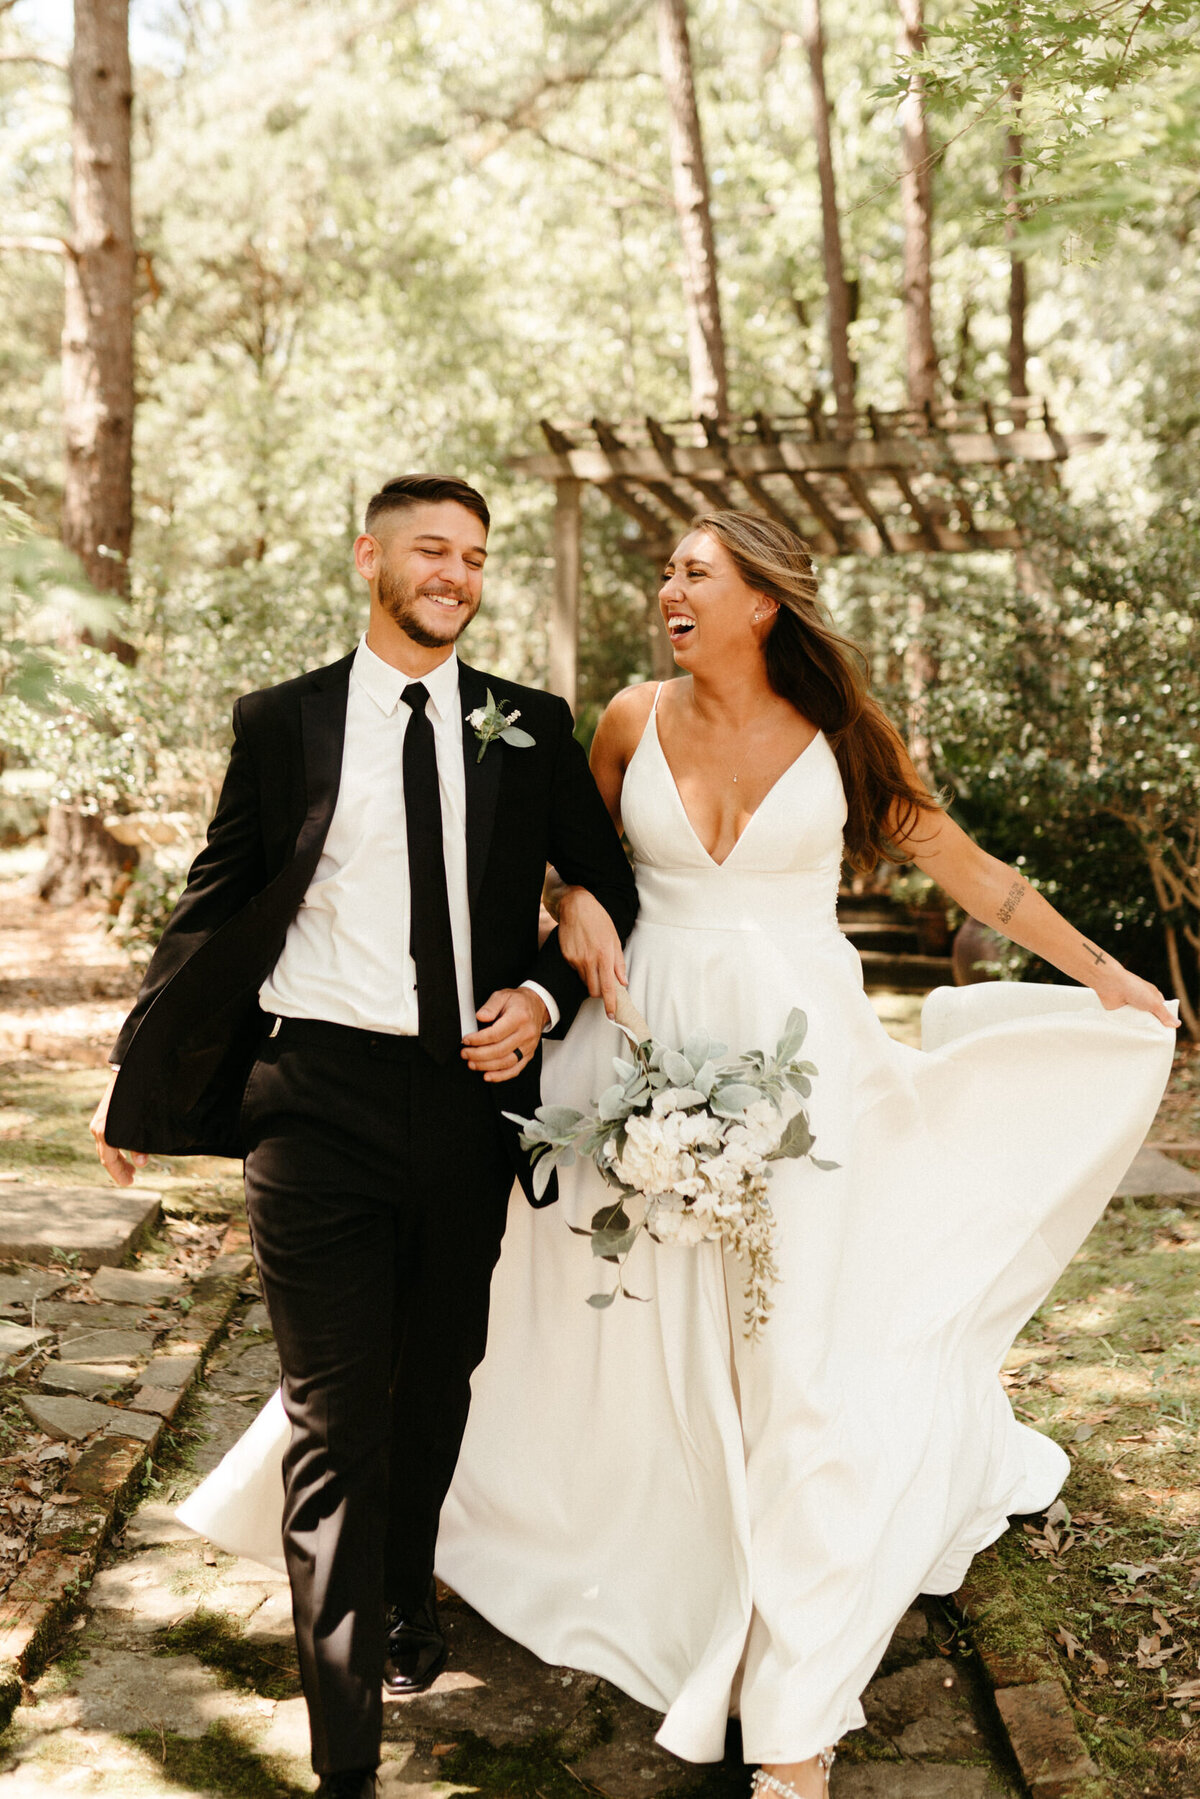 Couple in classic wedding attire laughing and running with trees and a trellis in the background